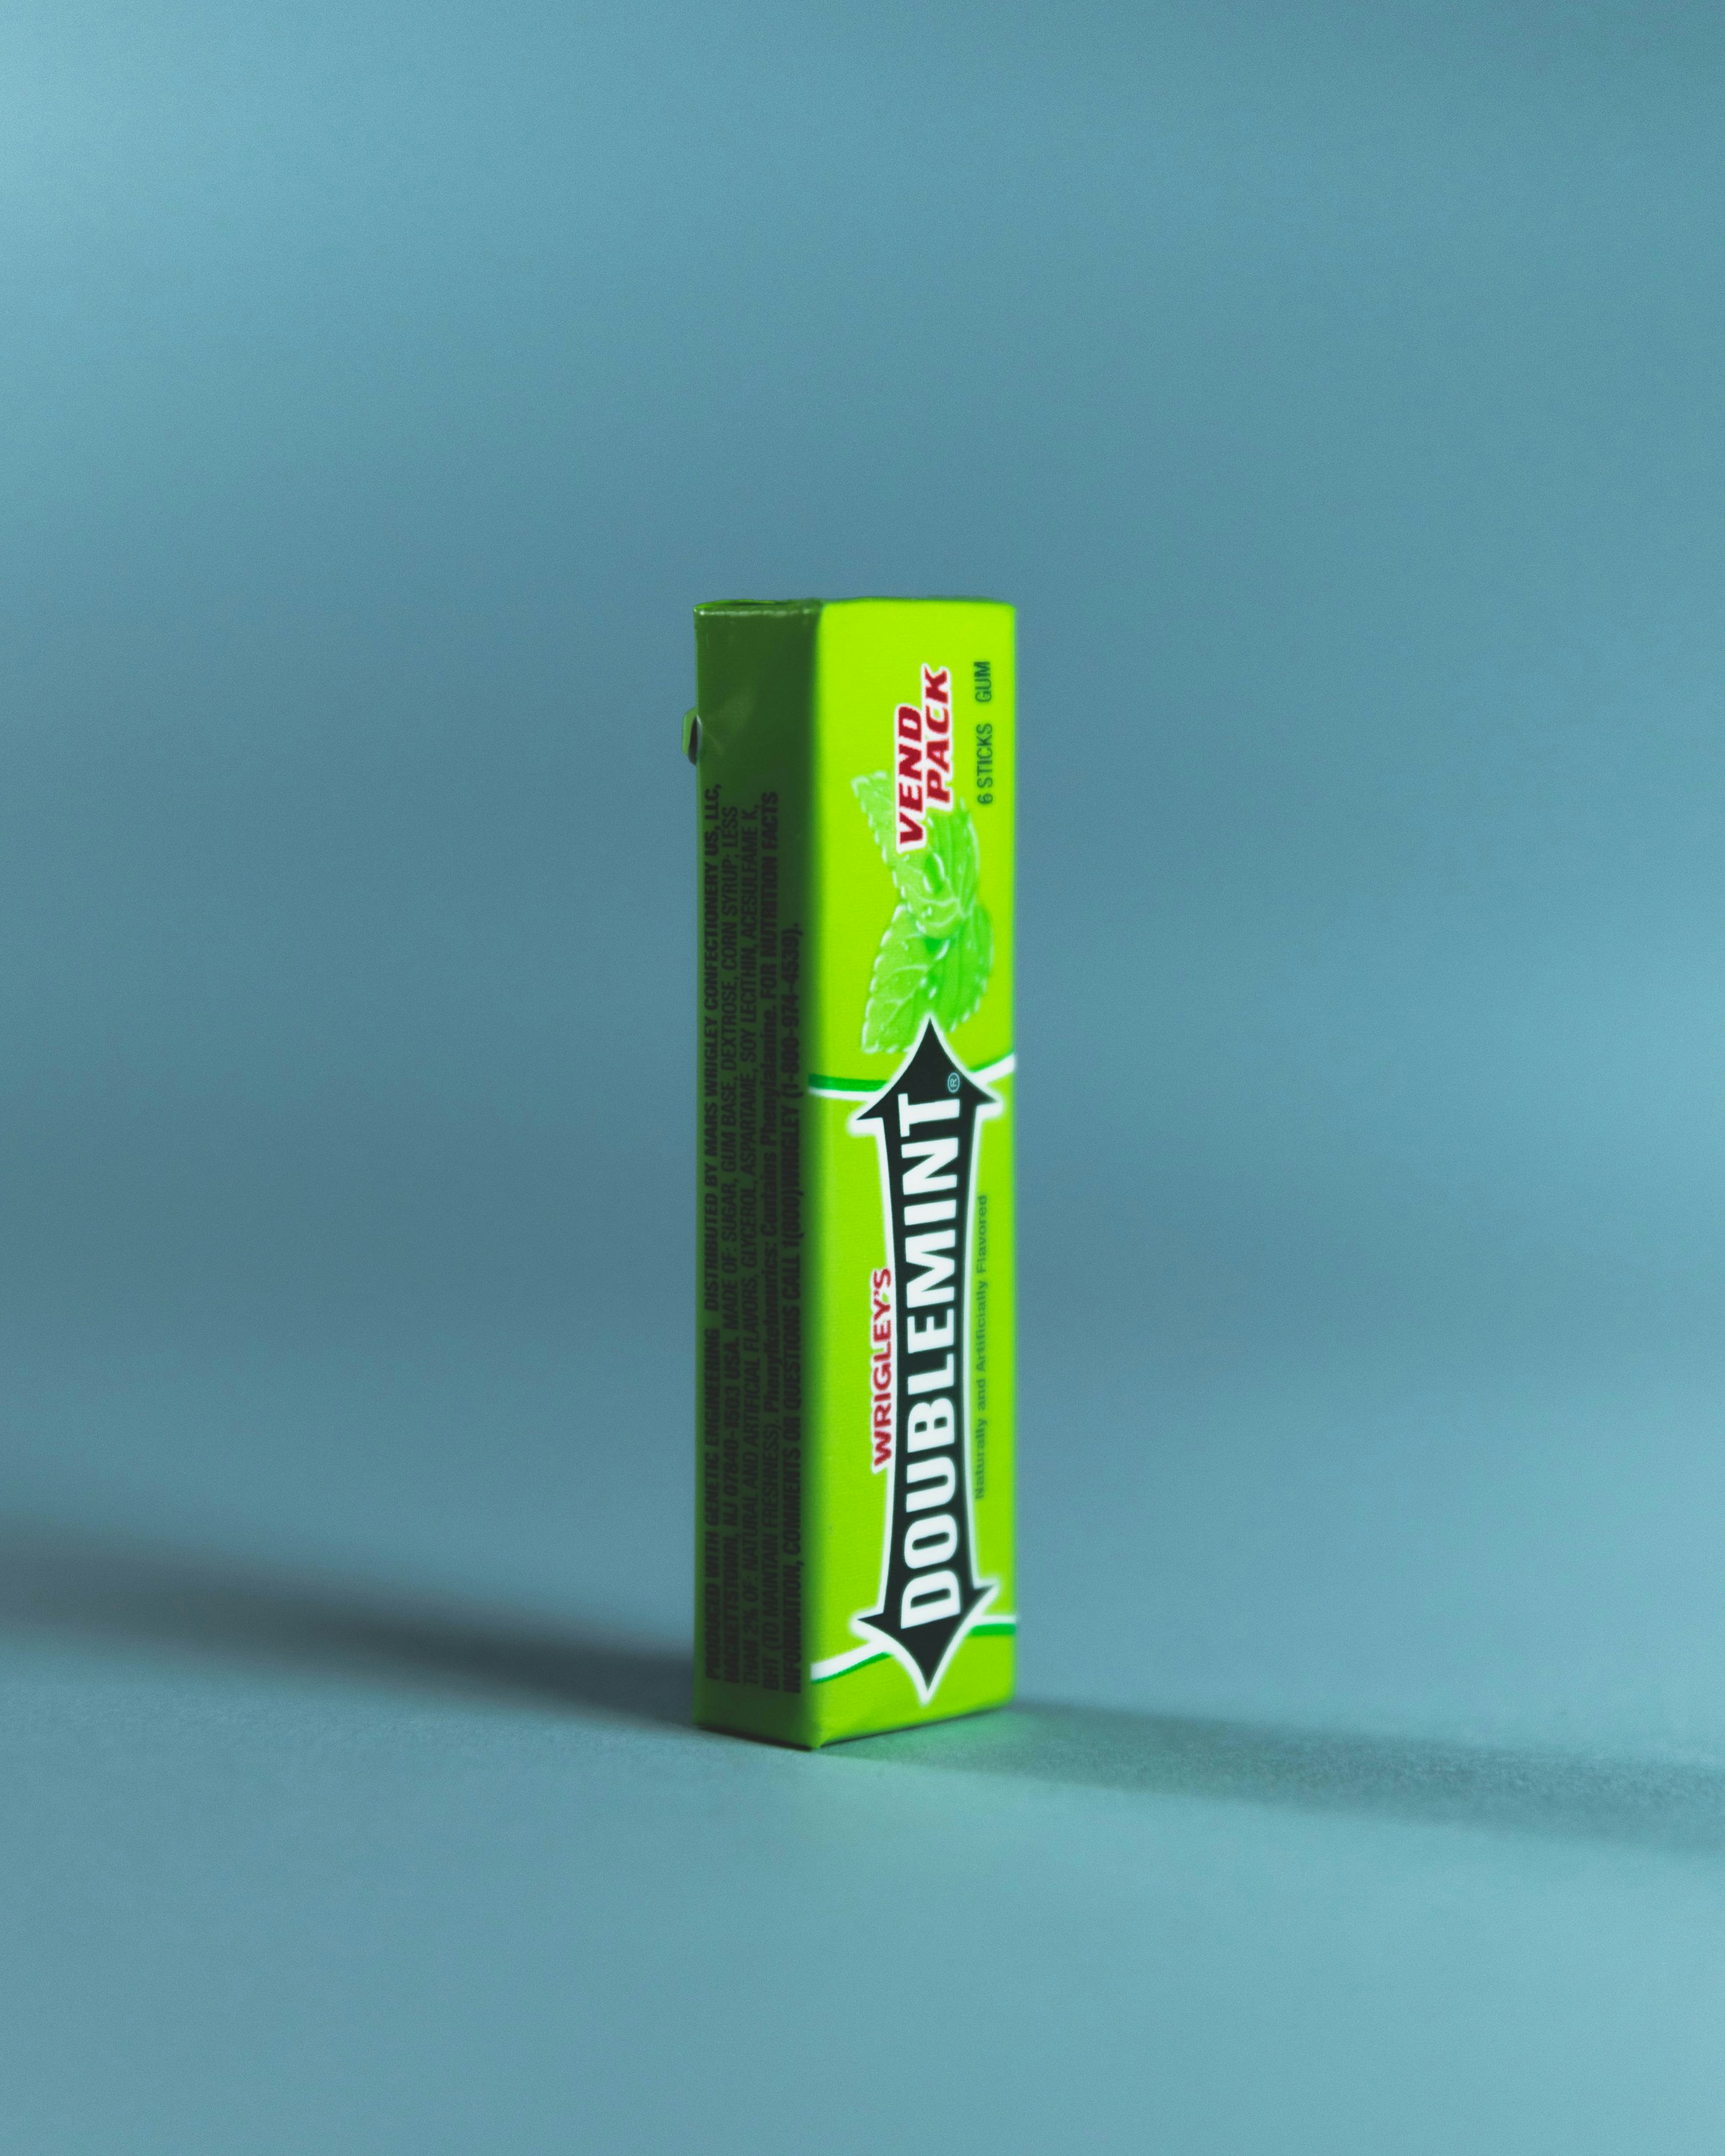 A pack of chewing gum | Source: Unsplash